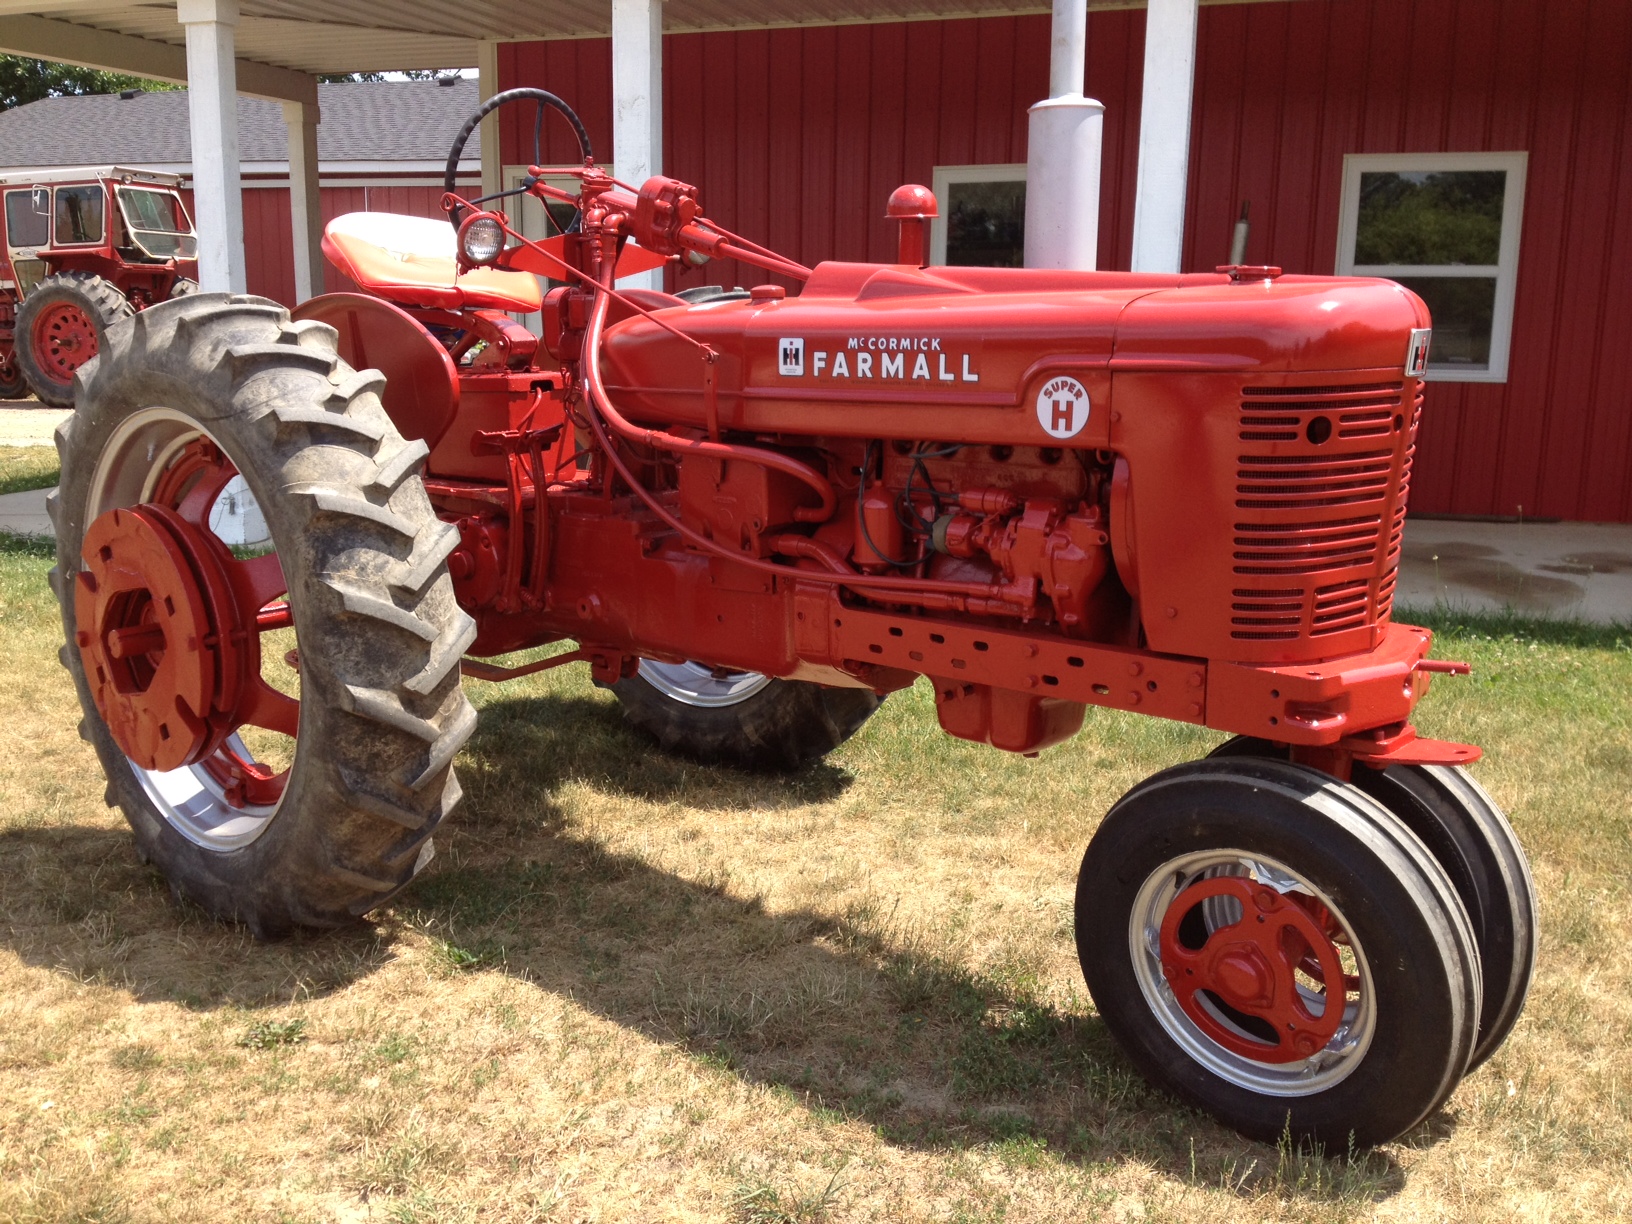 Buyer Beware: What to Look for when Purchasing an Antique Tractor